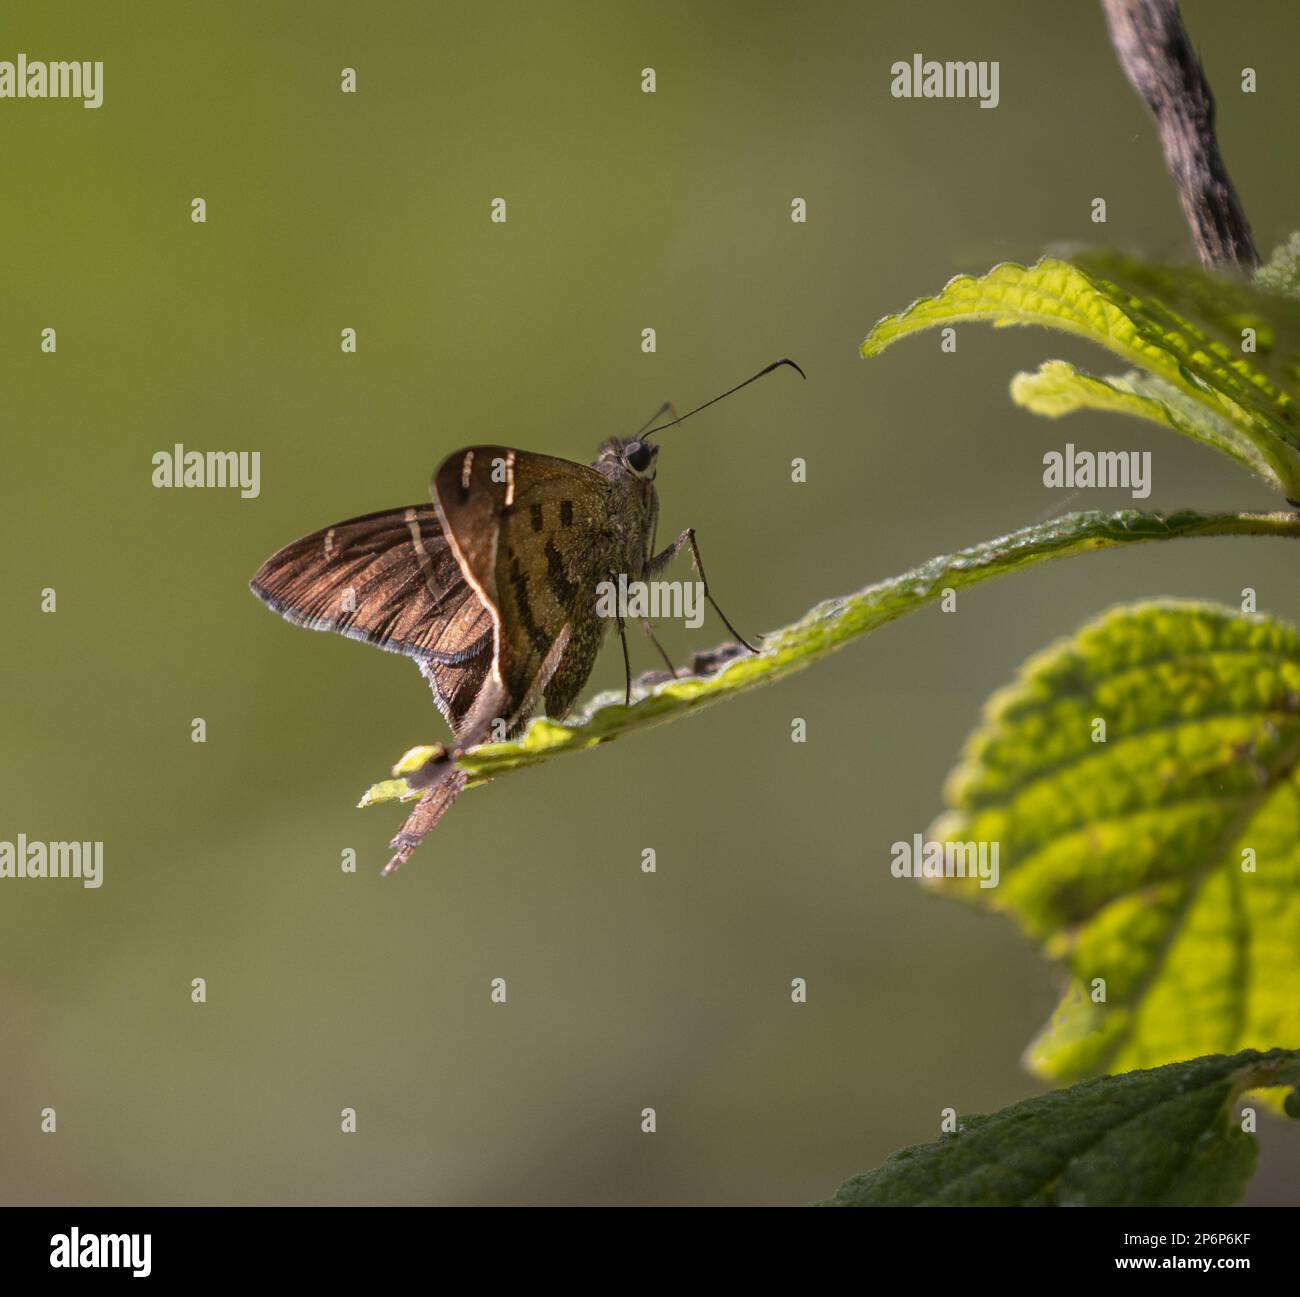 A Long-tailed Skipper on a green plant in Costa Rica Stock Photo